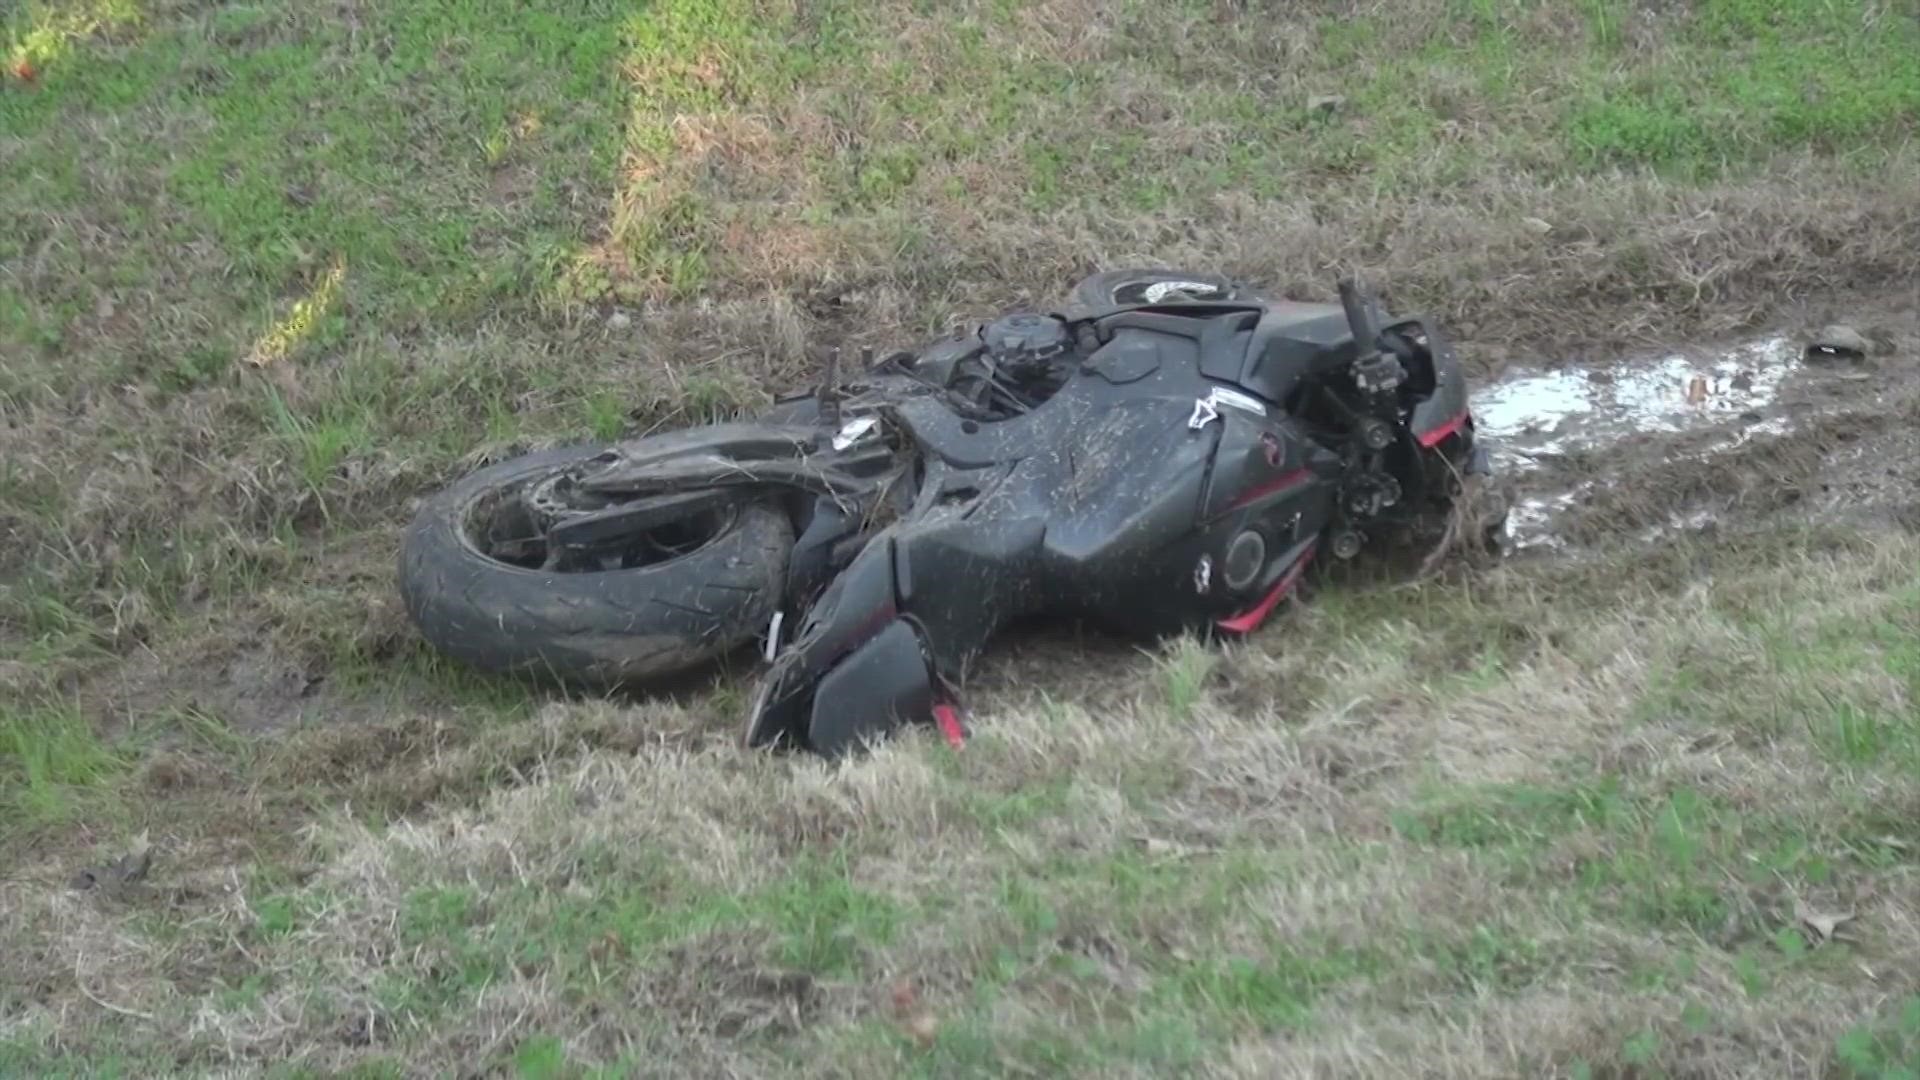 The firefighter was off-duty Thursday and was riding his motorcycle through the Sam Houston National Forest.